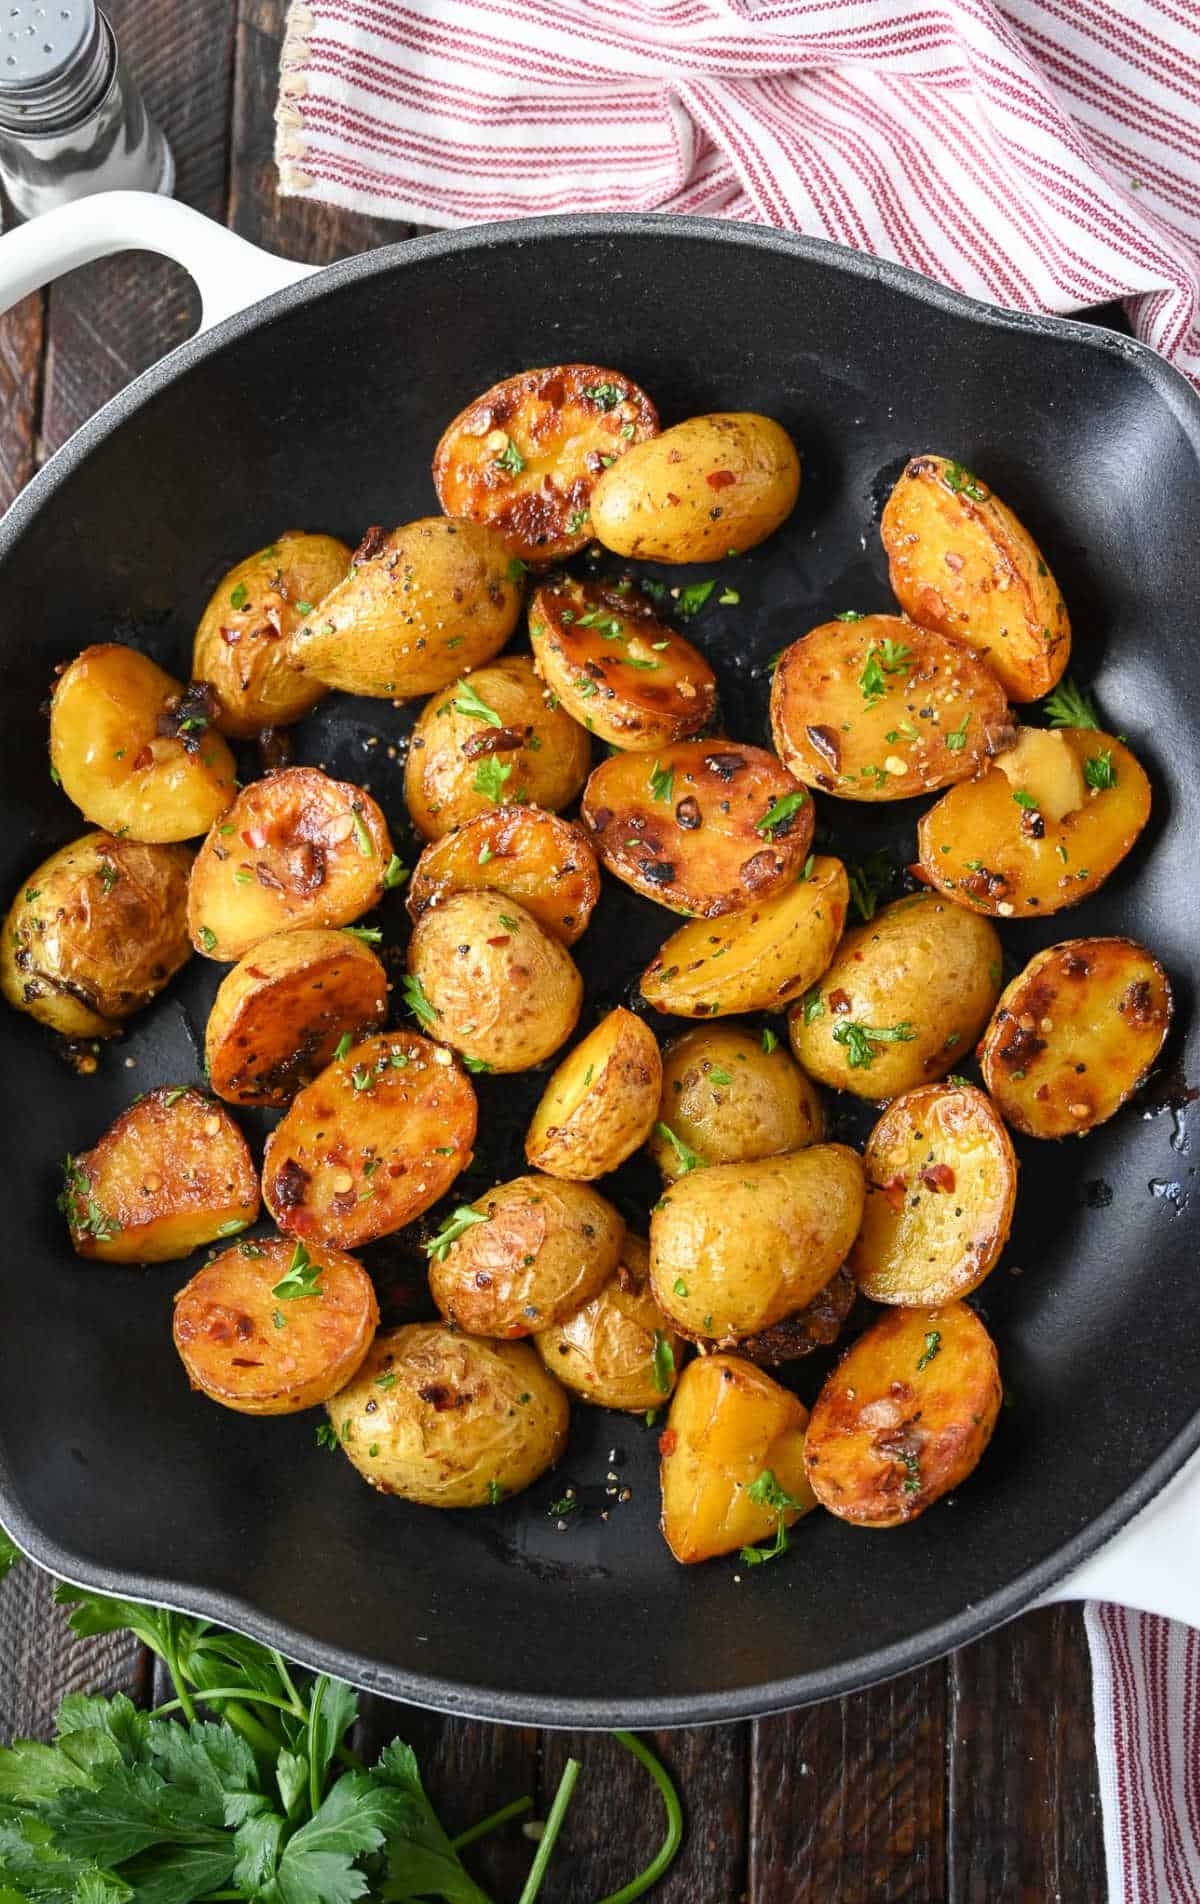 Potatoes in a skillet.